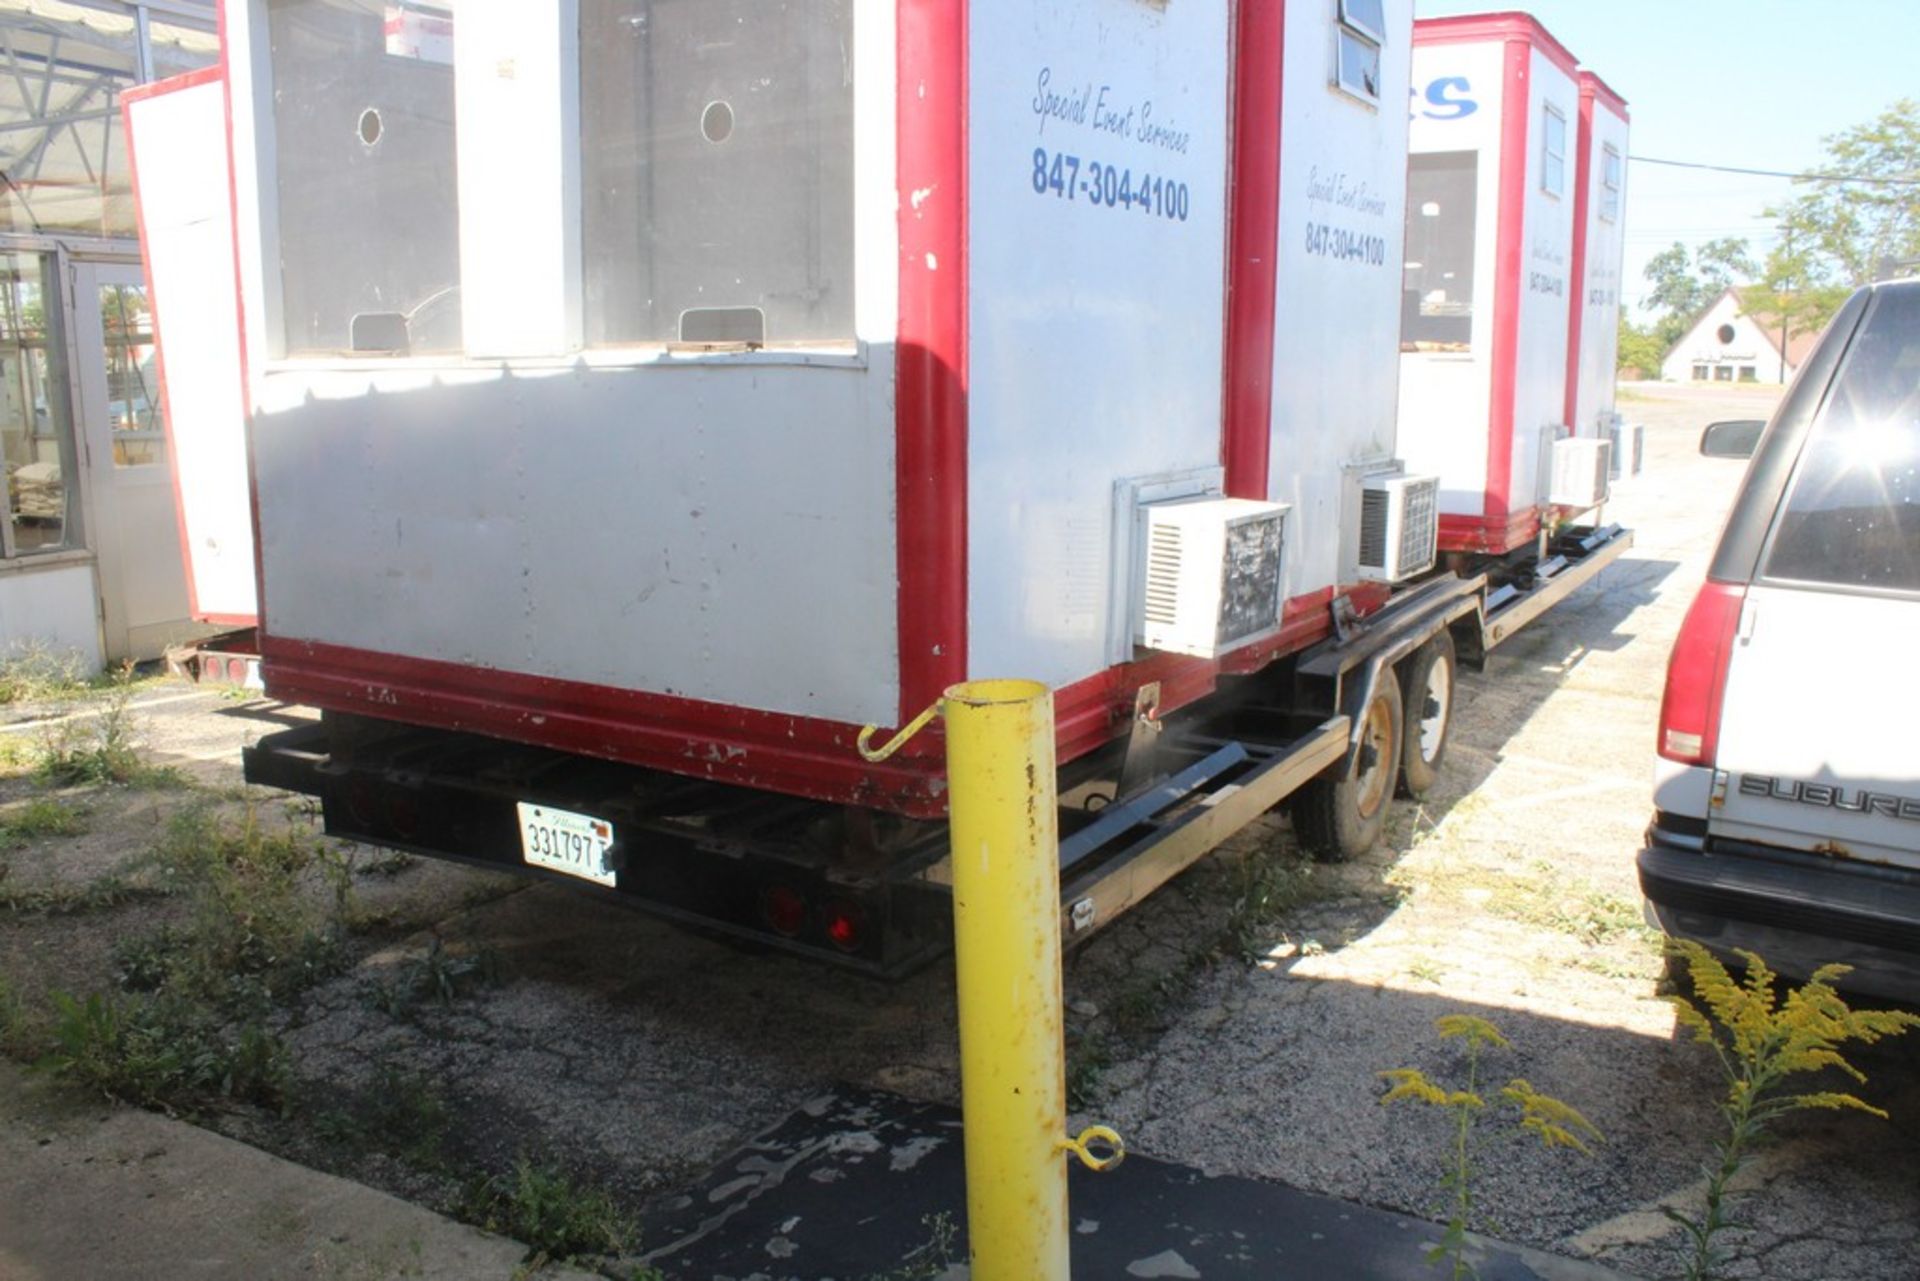 TANDEM AXLE FLATBED TRAILER, 24' WITH (4) TICKET BOOTHS, 7' X 56" X 93" WITH A/C UNITS - Image 3 of 8